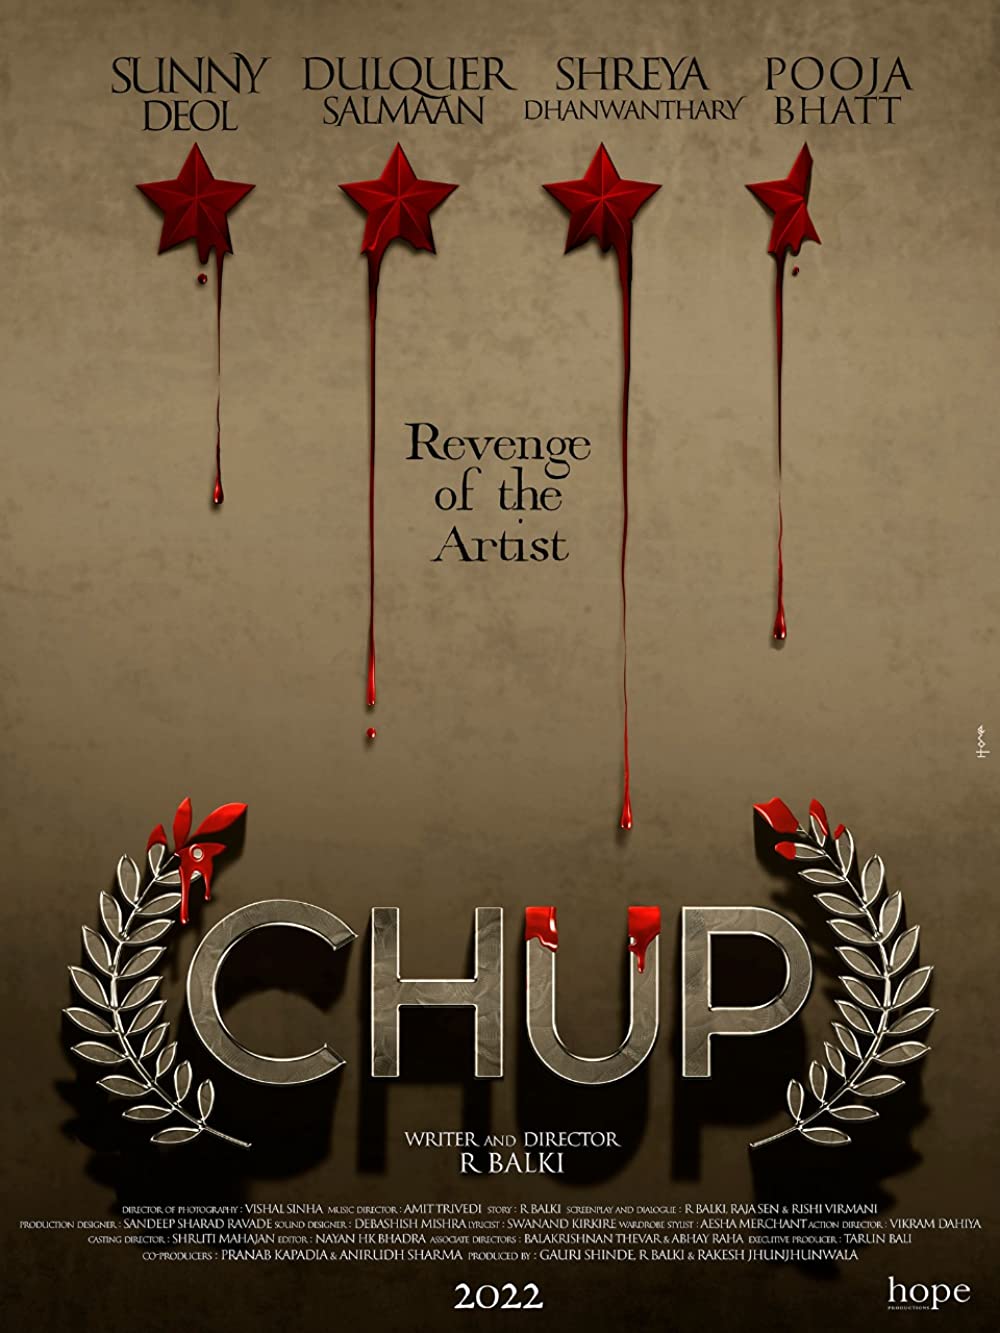 Teaser of Chup releases on Saturday